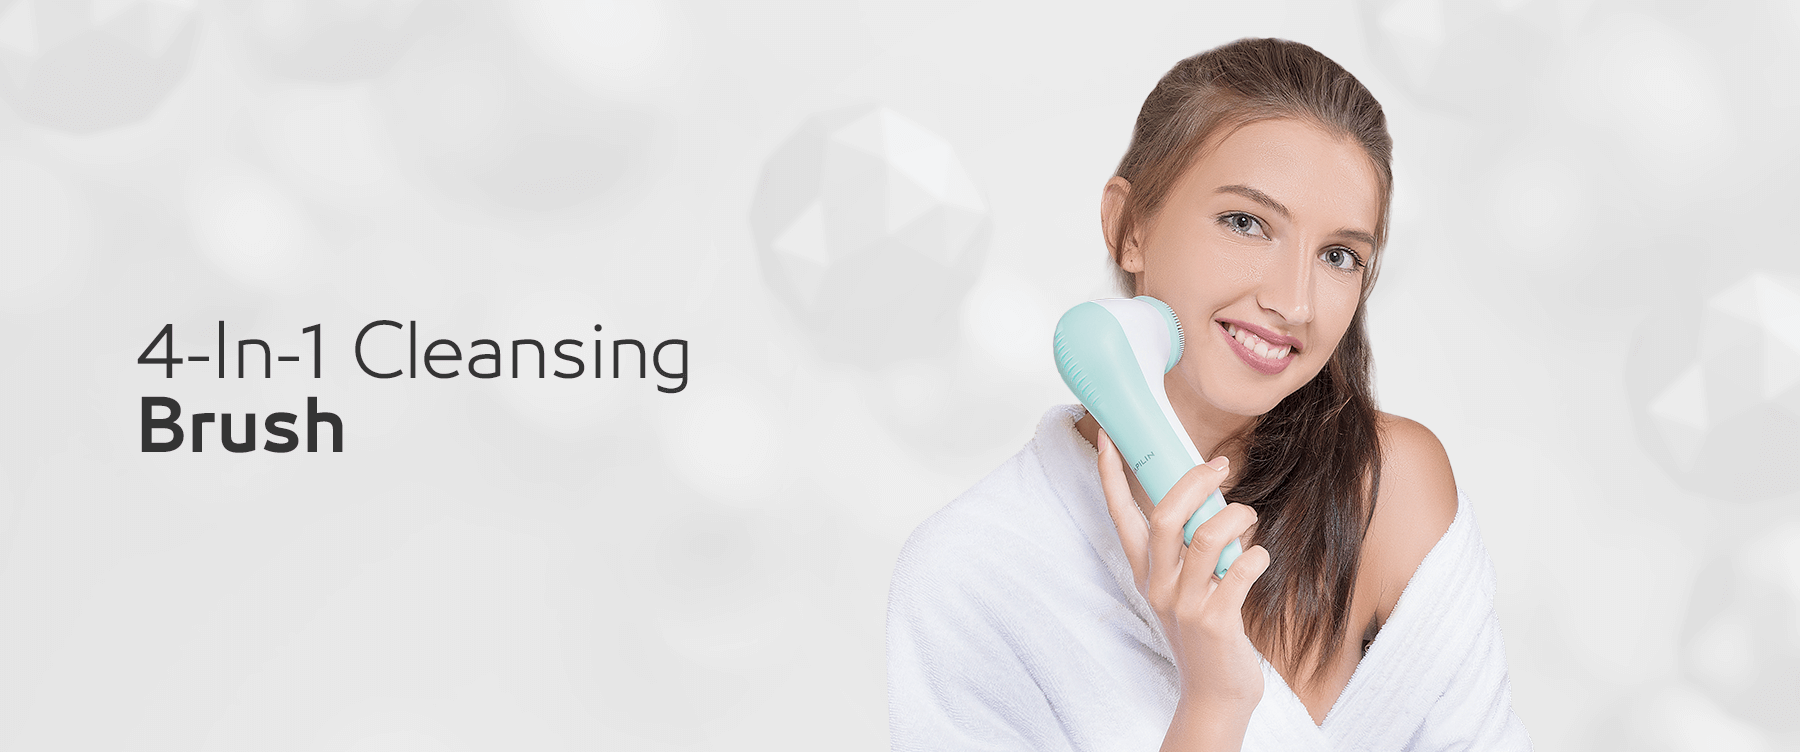 4-IN-1 CLEANSING BRUSH